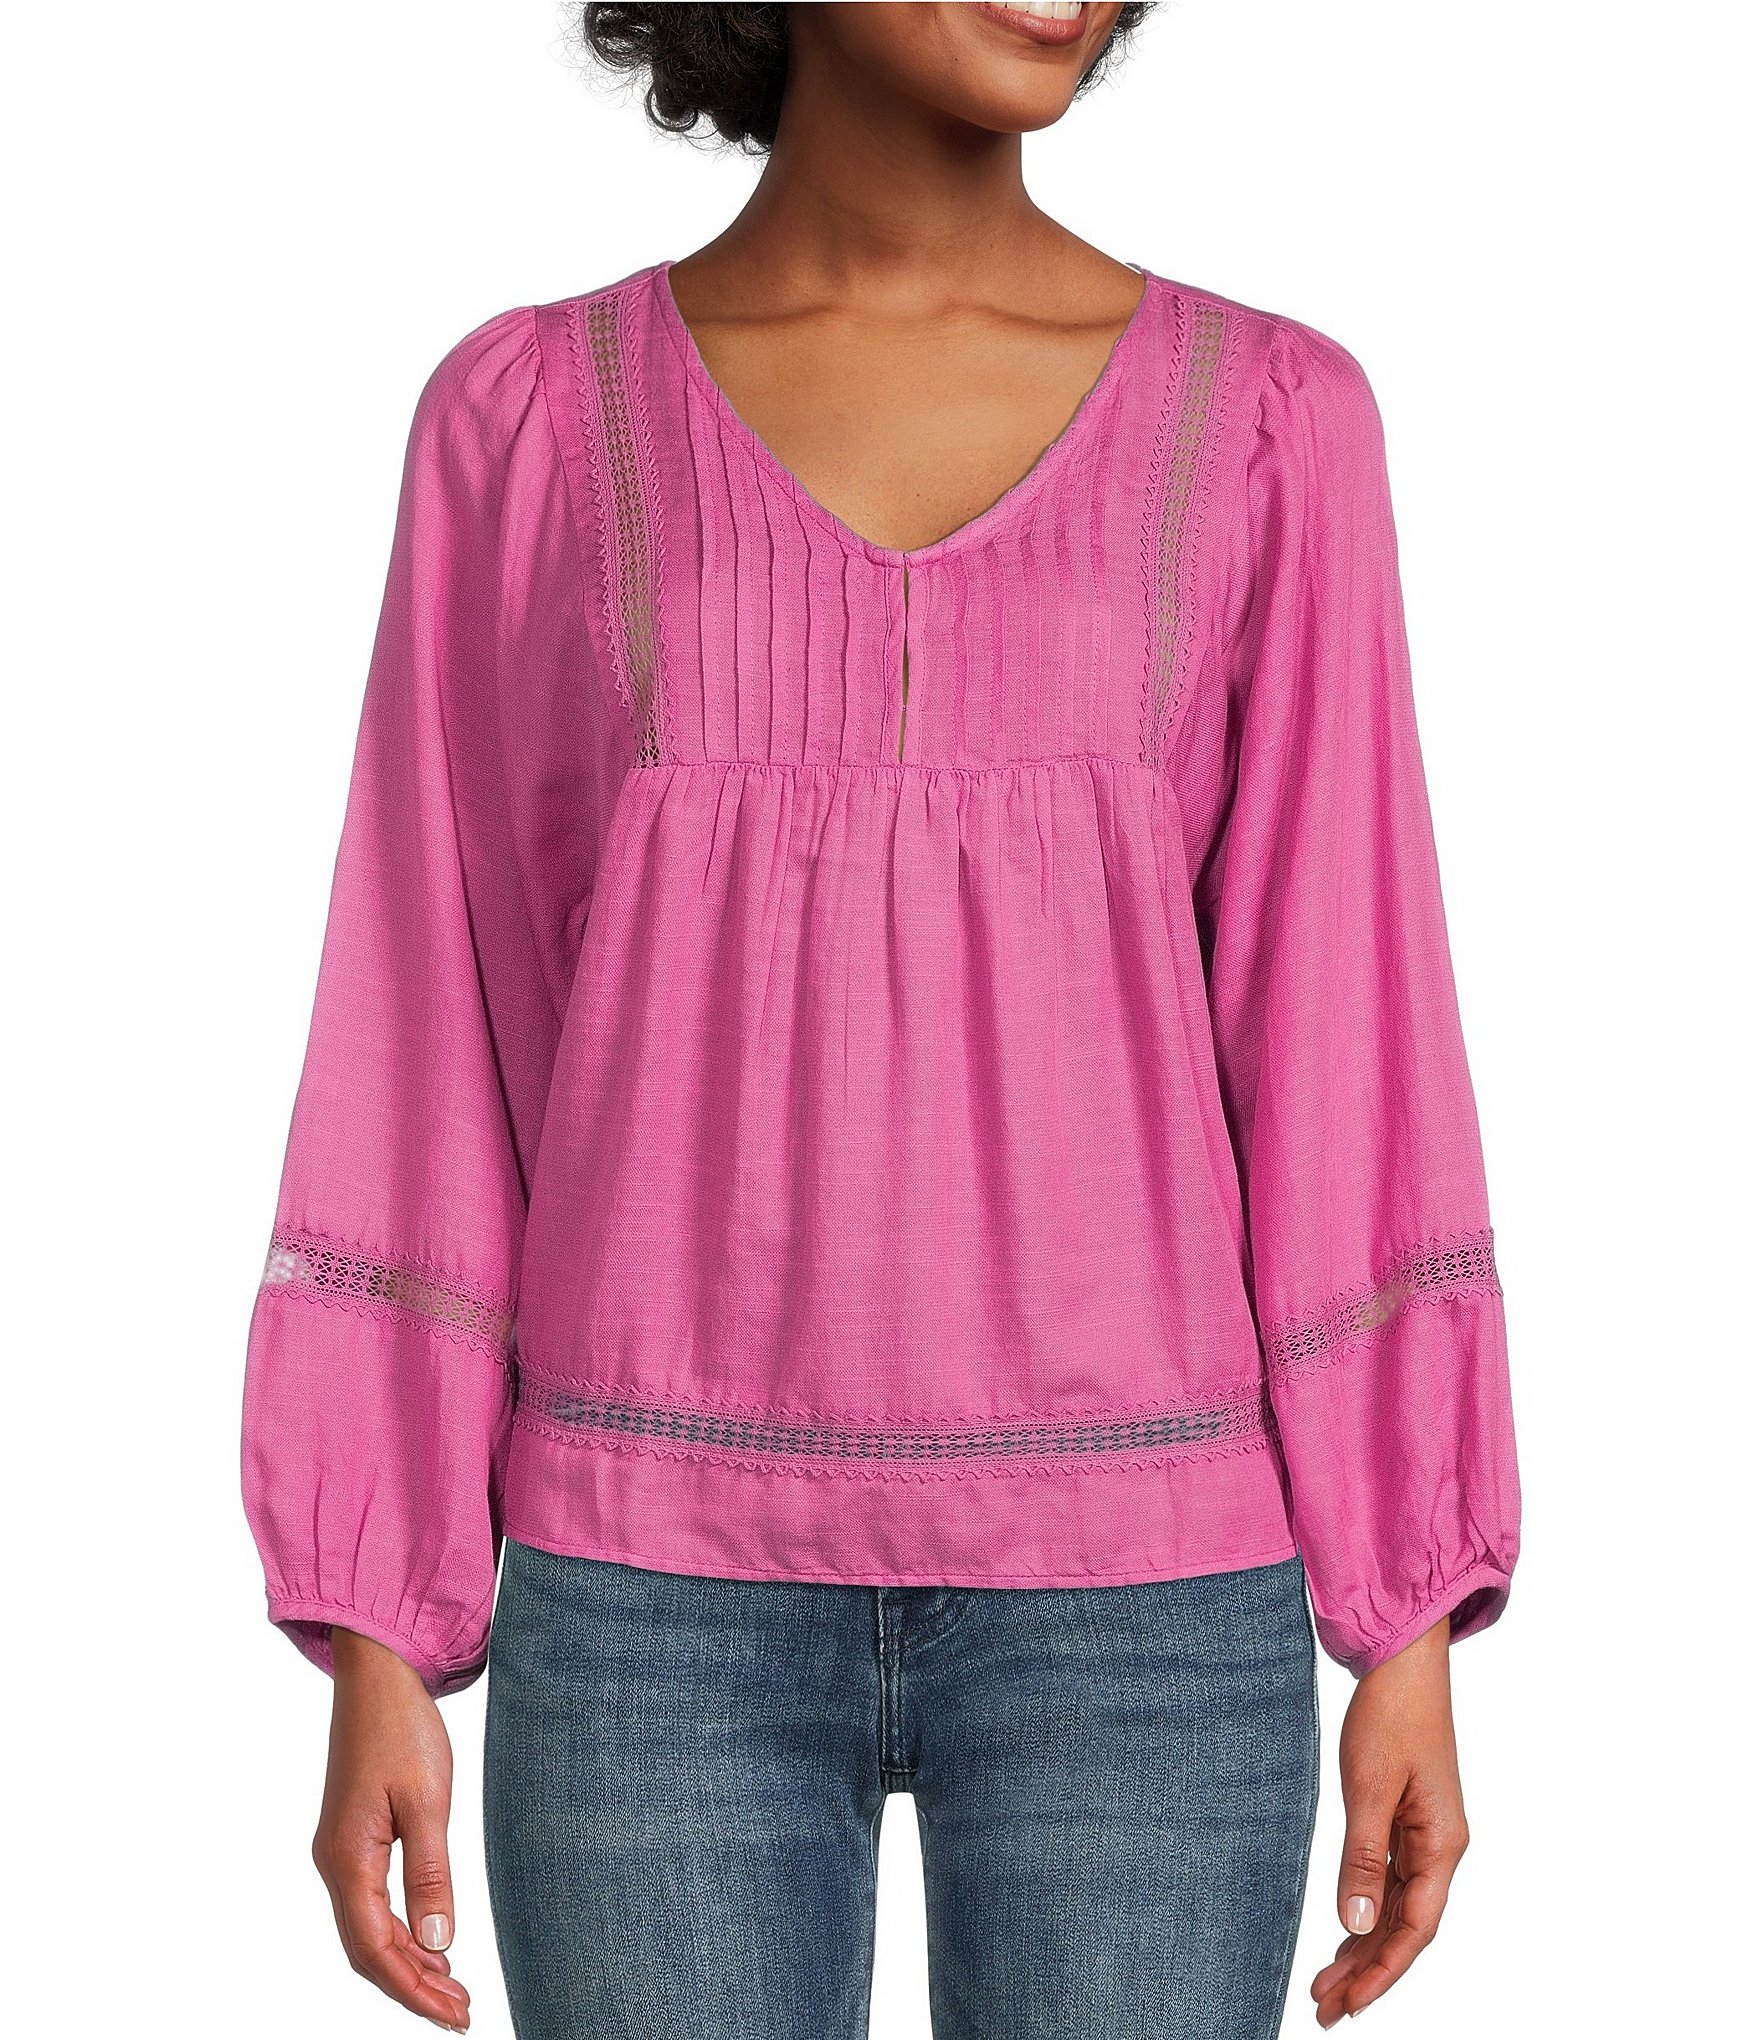 Lucky Brand Women's Lace-Trimmed V-neck Top